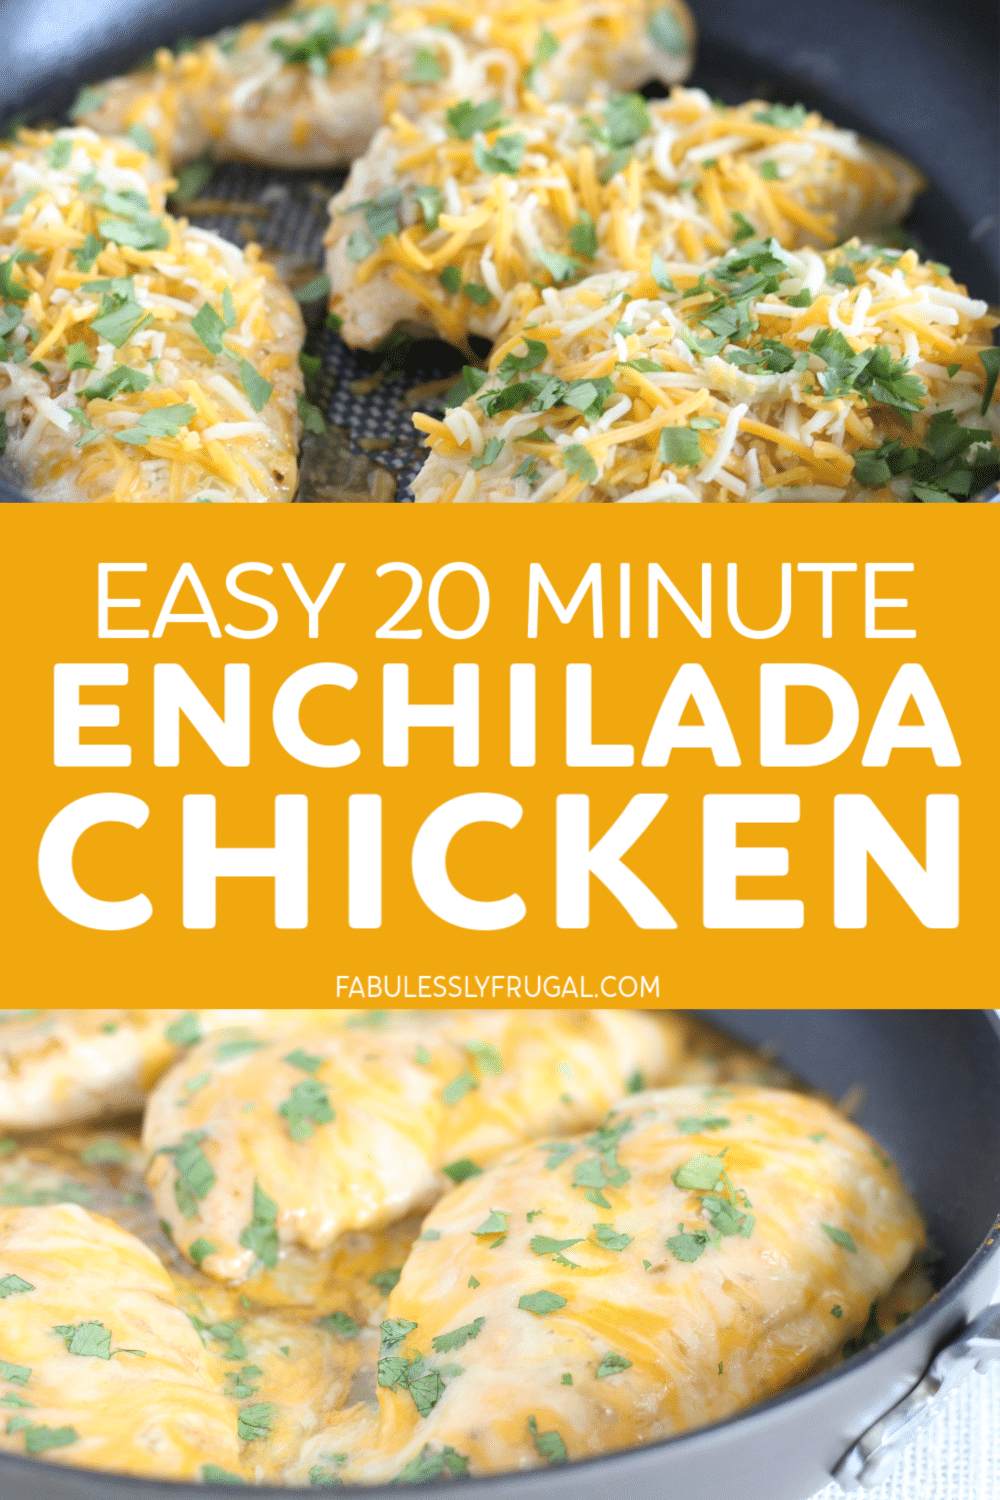 Baked enchilada chicken breast before and after